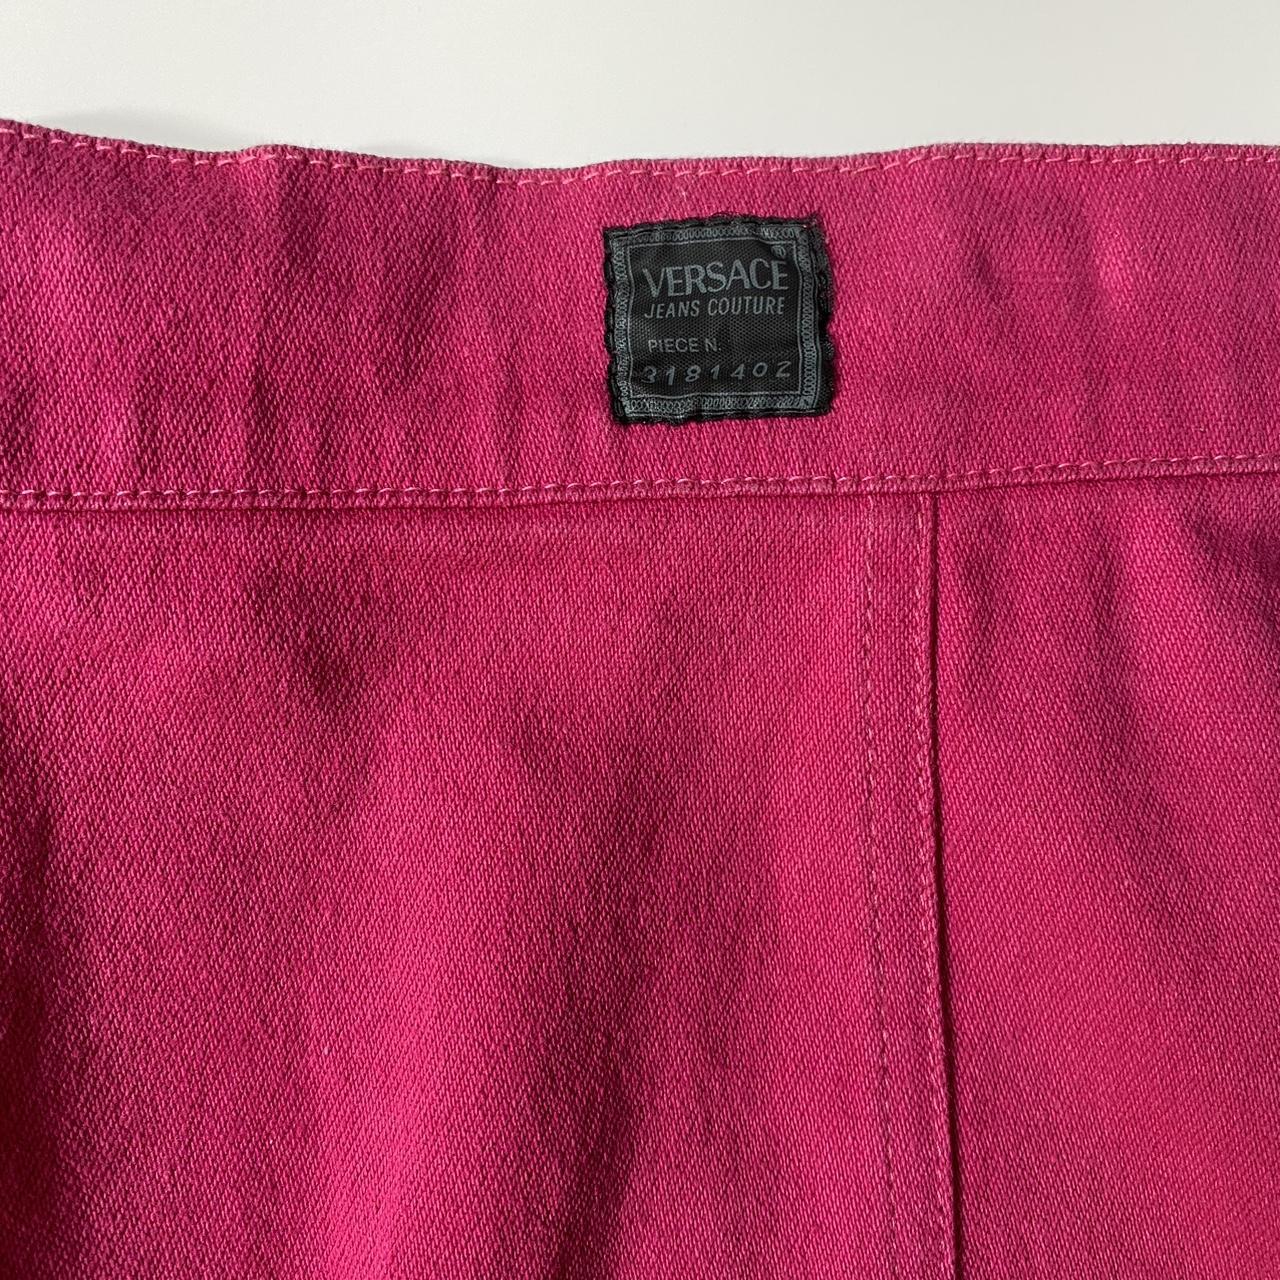 Vintage Versace Skirt Brand new with tags! - Depop